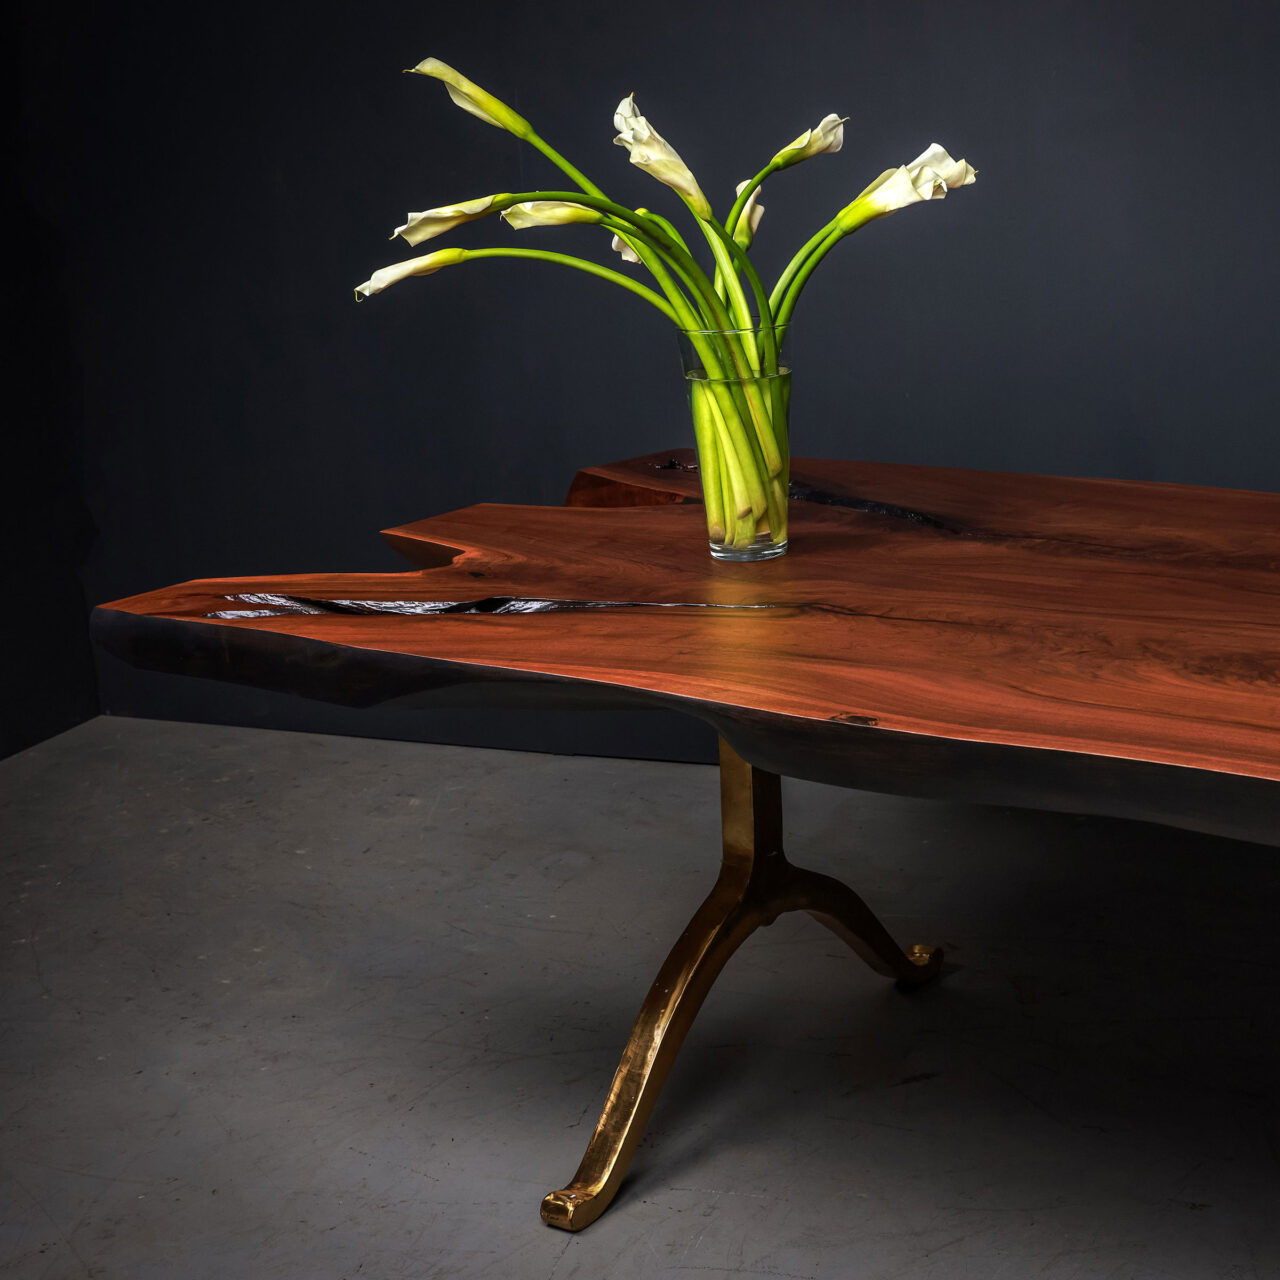 A luxury live edge table by SENTIENT, with stunning wishbone legs, and organic, raw tabletop, with a vase of lilies in front of a black background in a lit studio.